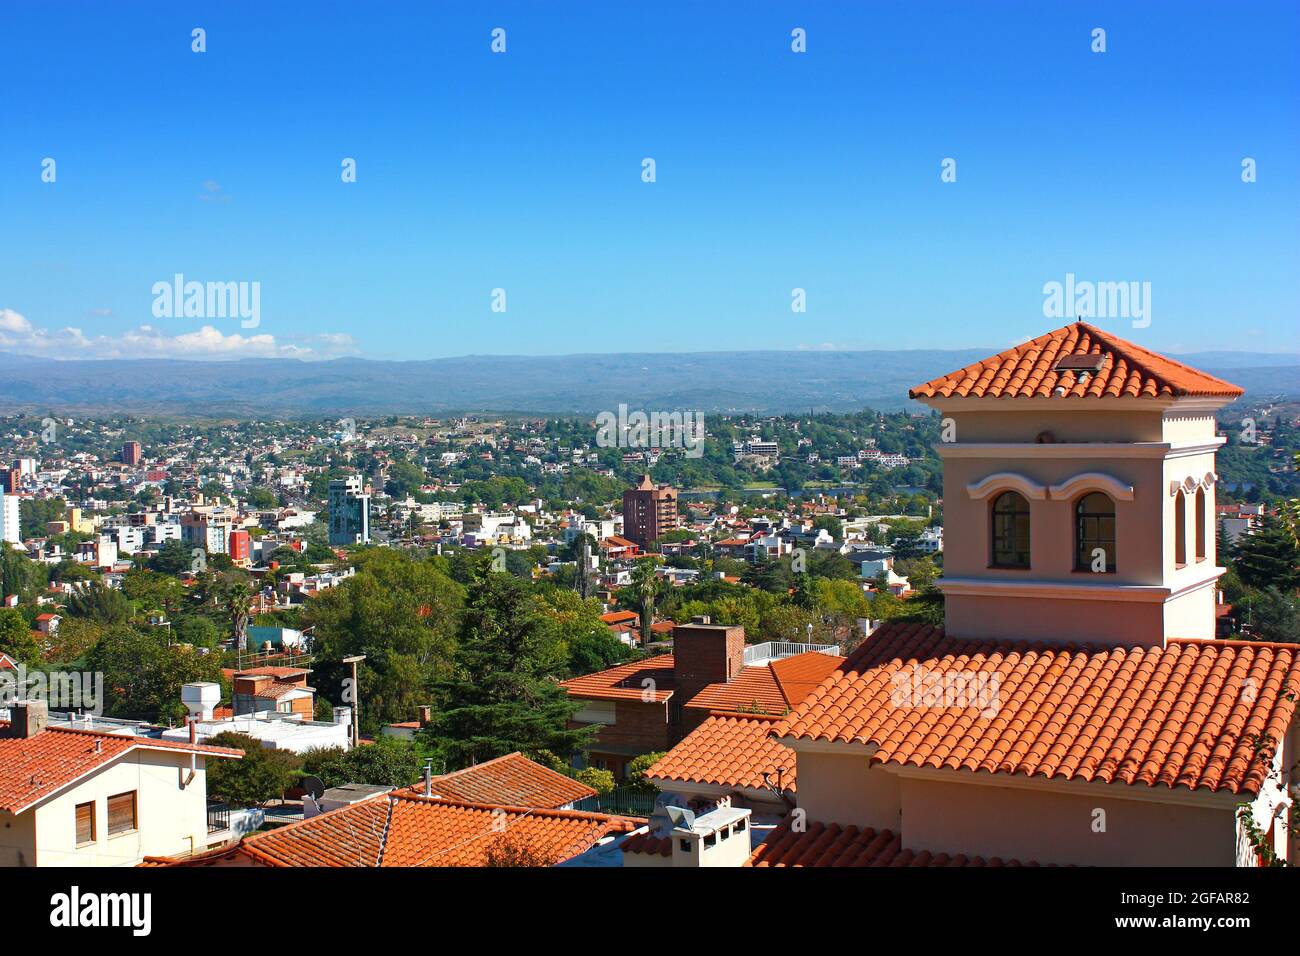 Panoramic view from the top of a hill of the landscape of Carlos Paz Town in a sunny day. A house with red roof in foreground. Stock Photo